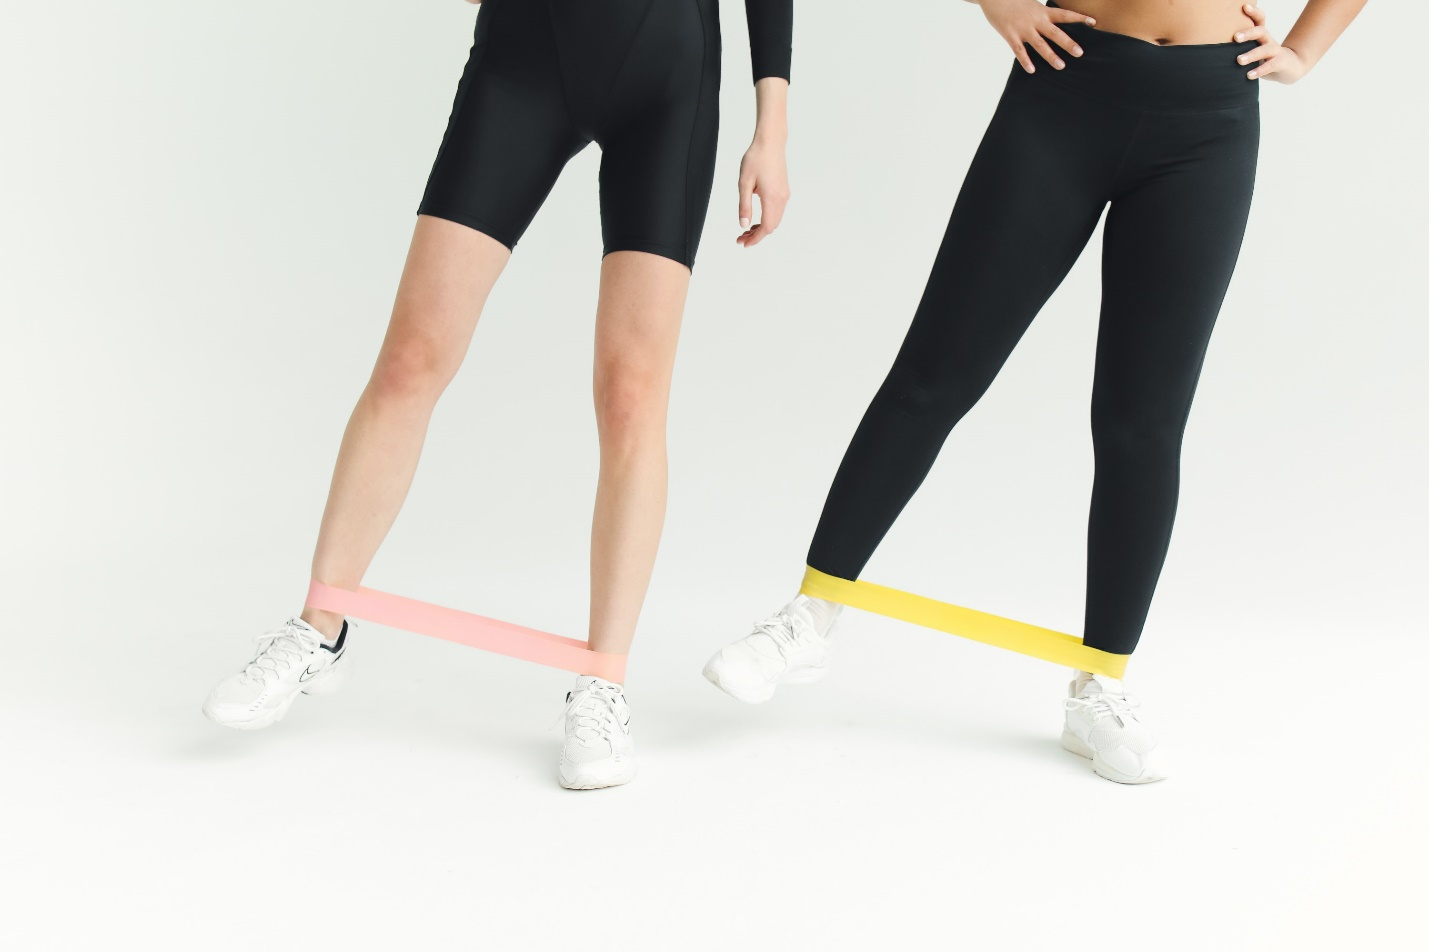 Two people using resistance bands